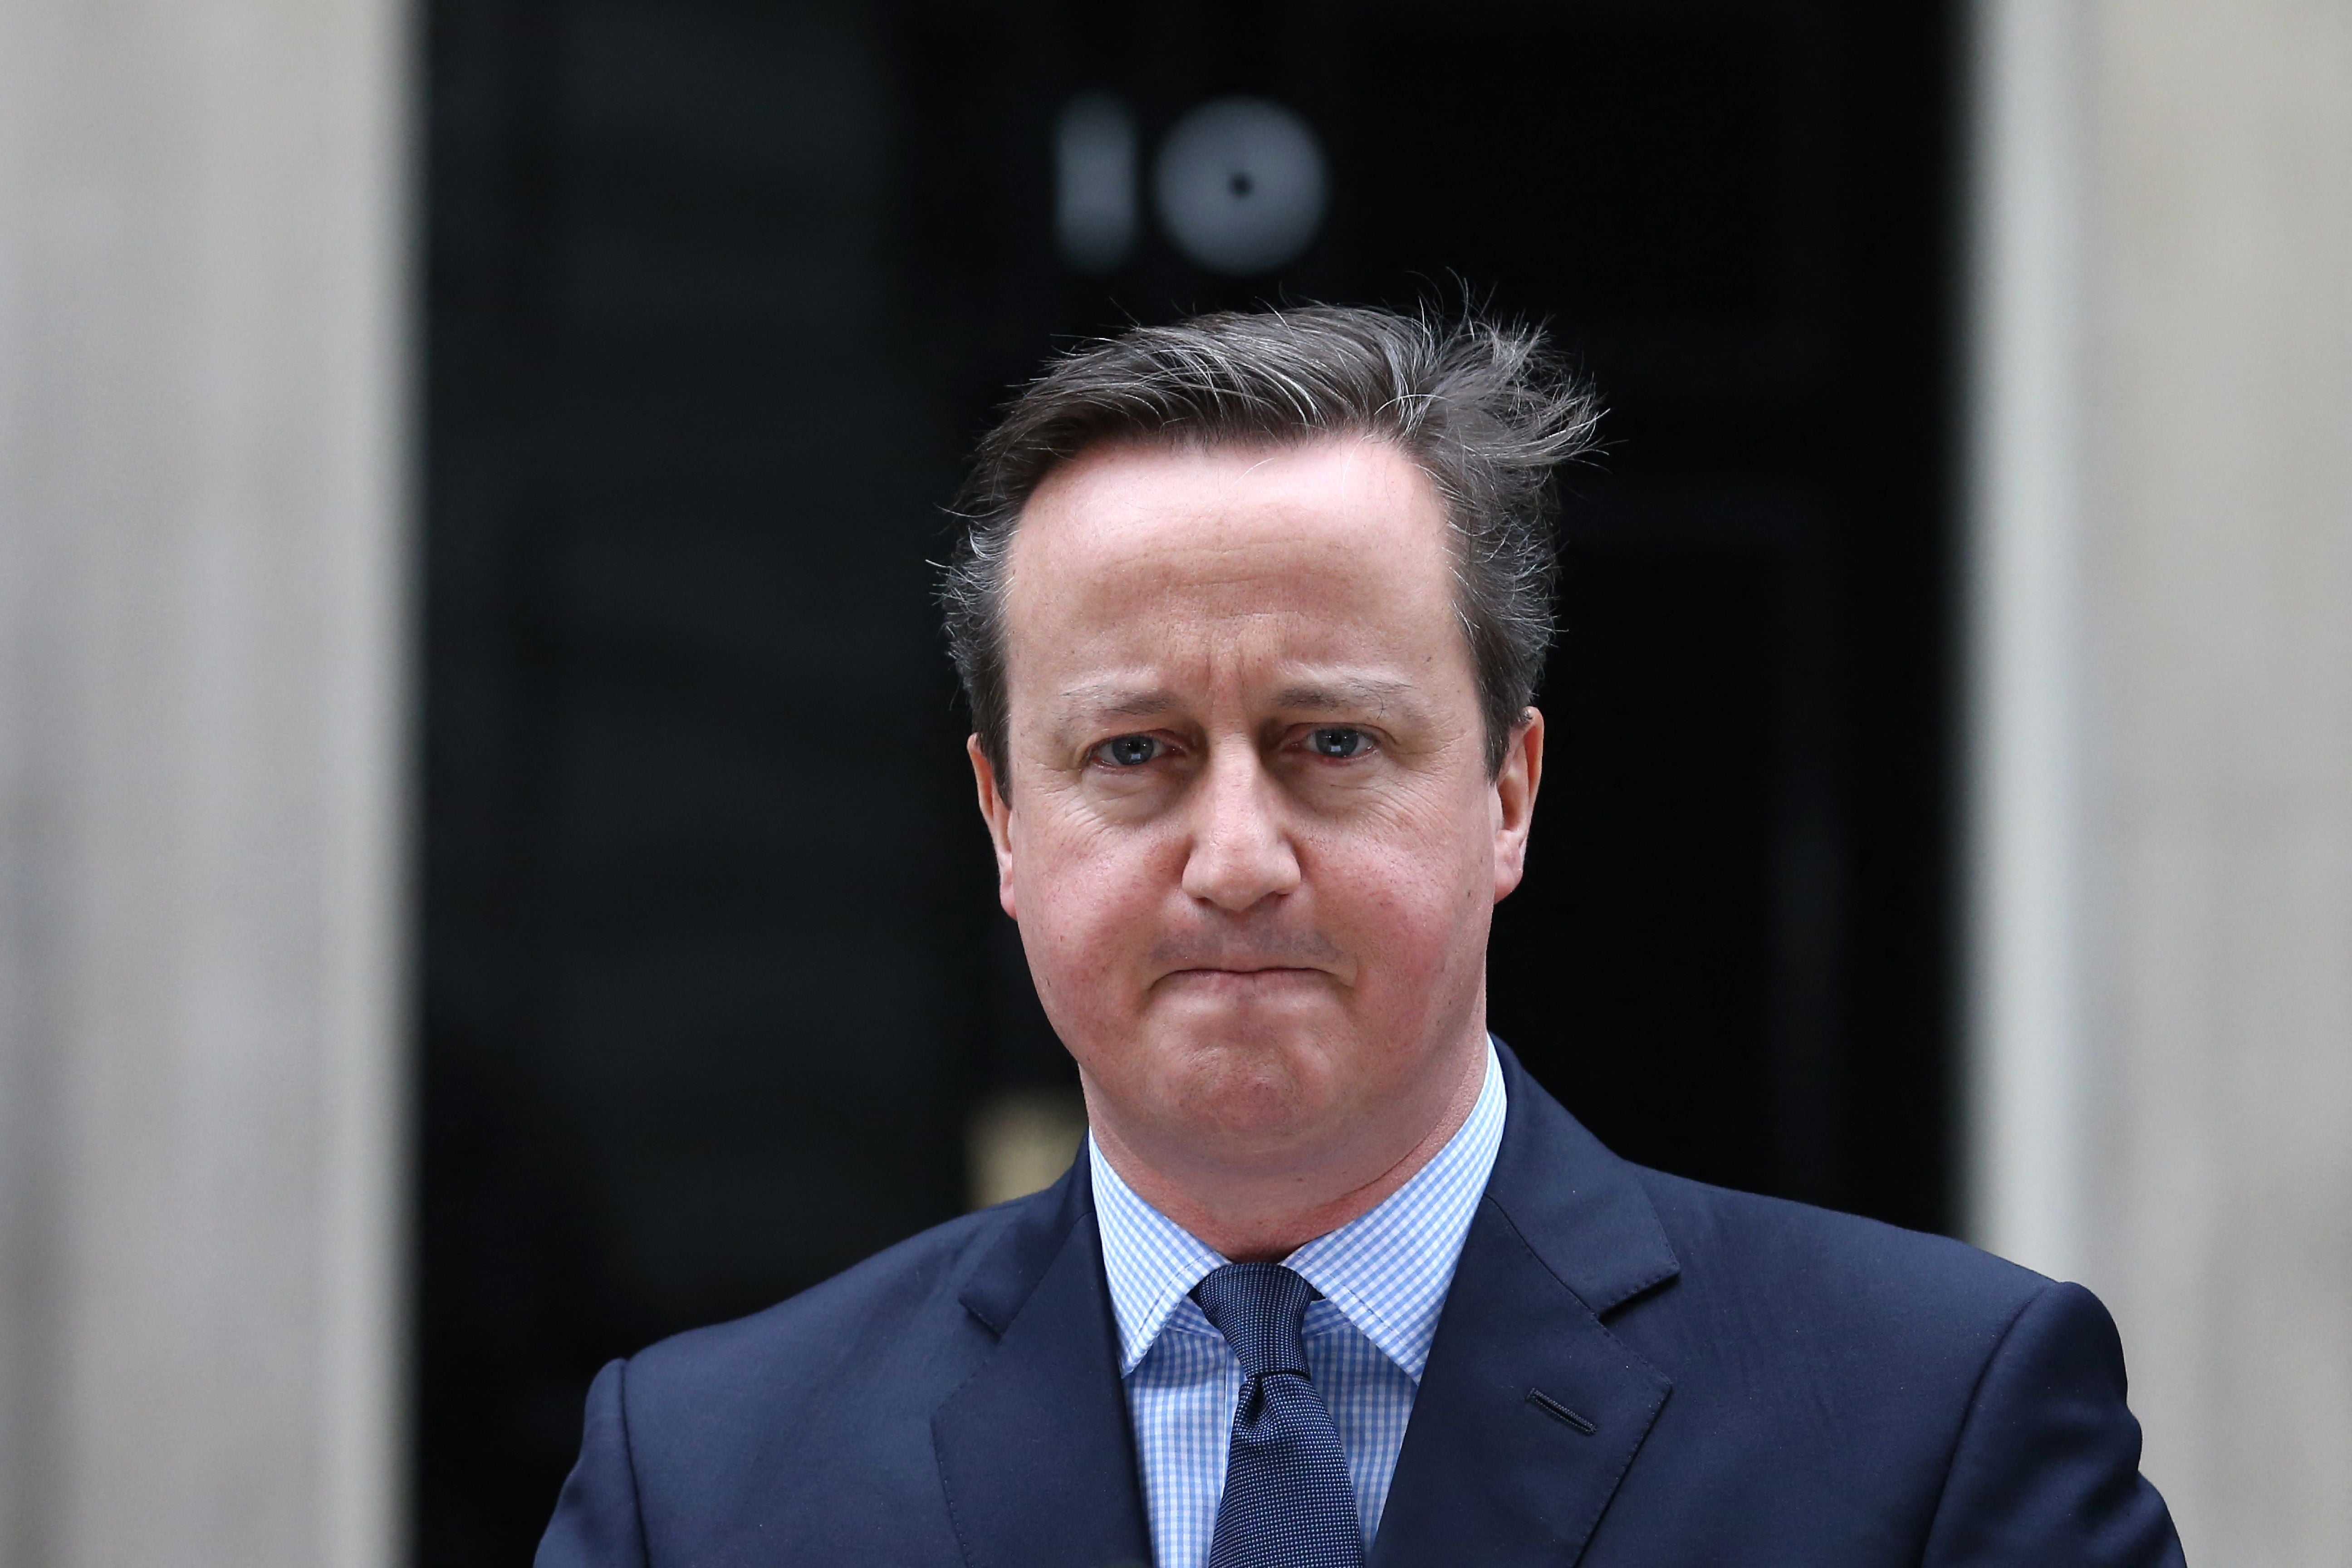 David Cameron said he will ‘respond positively’ to any request to give evidence about Greensill